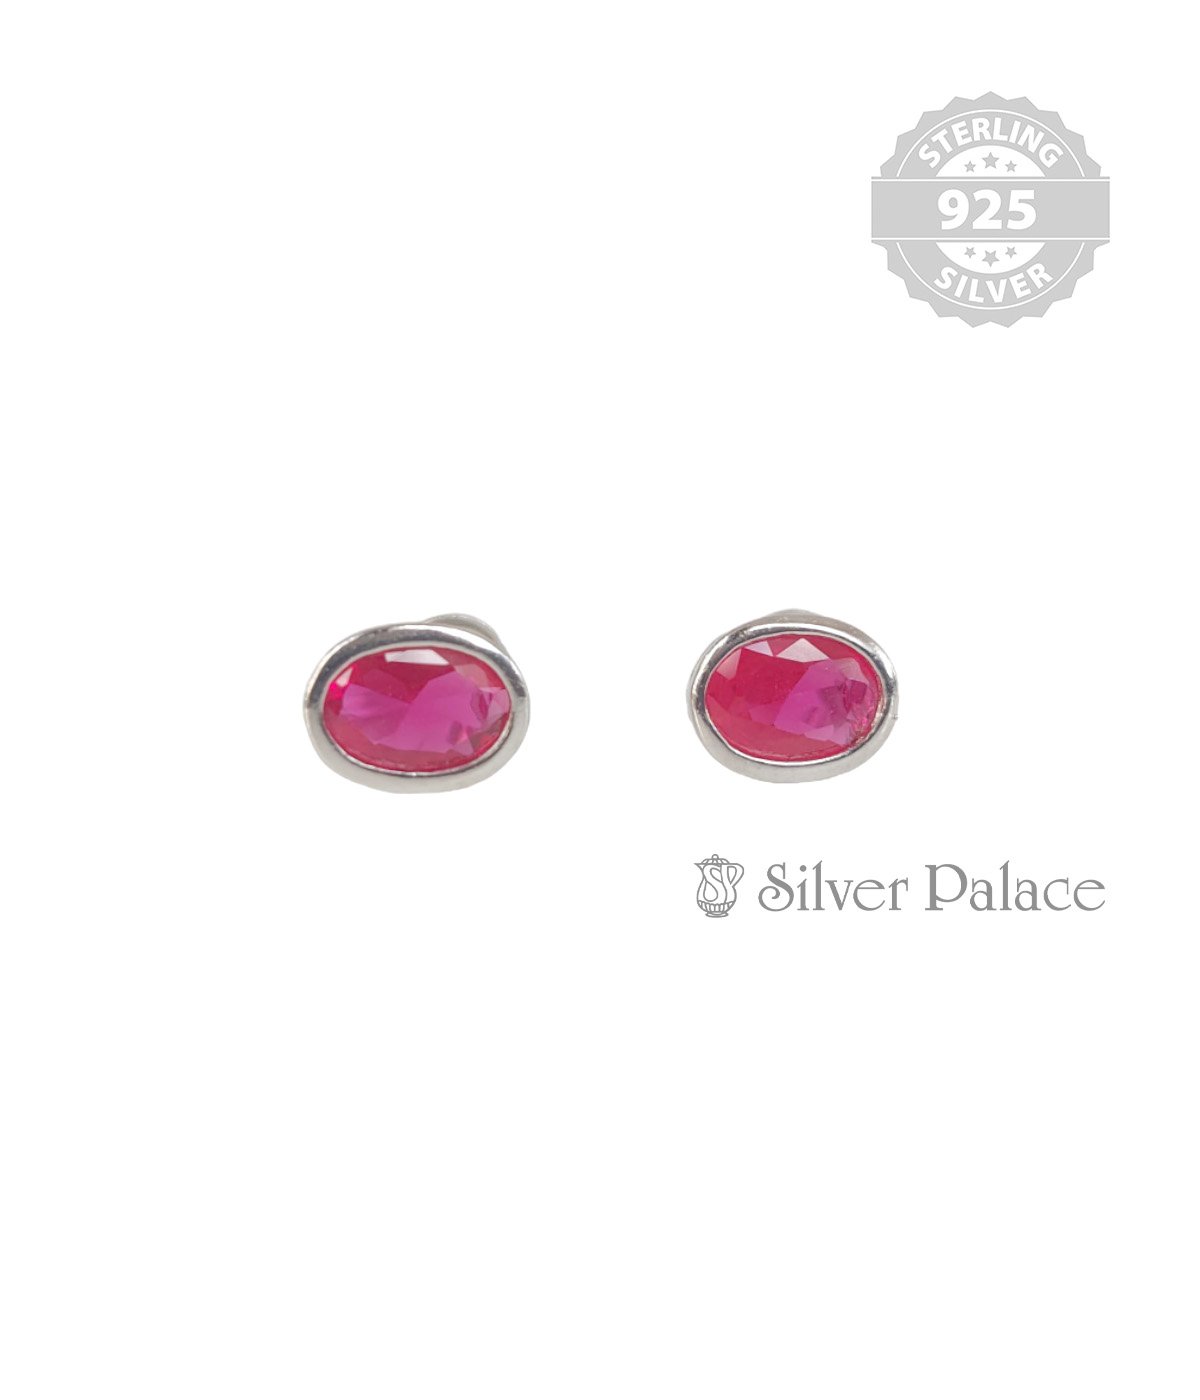 92.5 STERLING SILVER ROUND SHAPE PINK STONE STUD